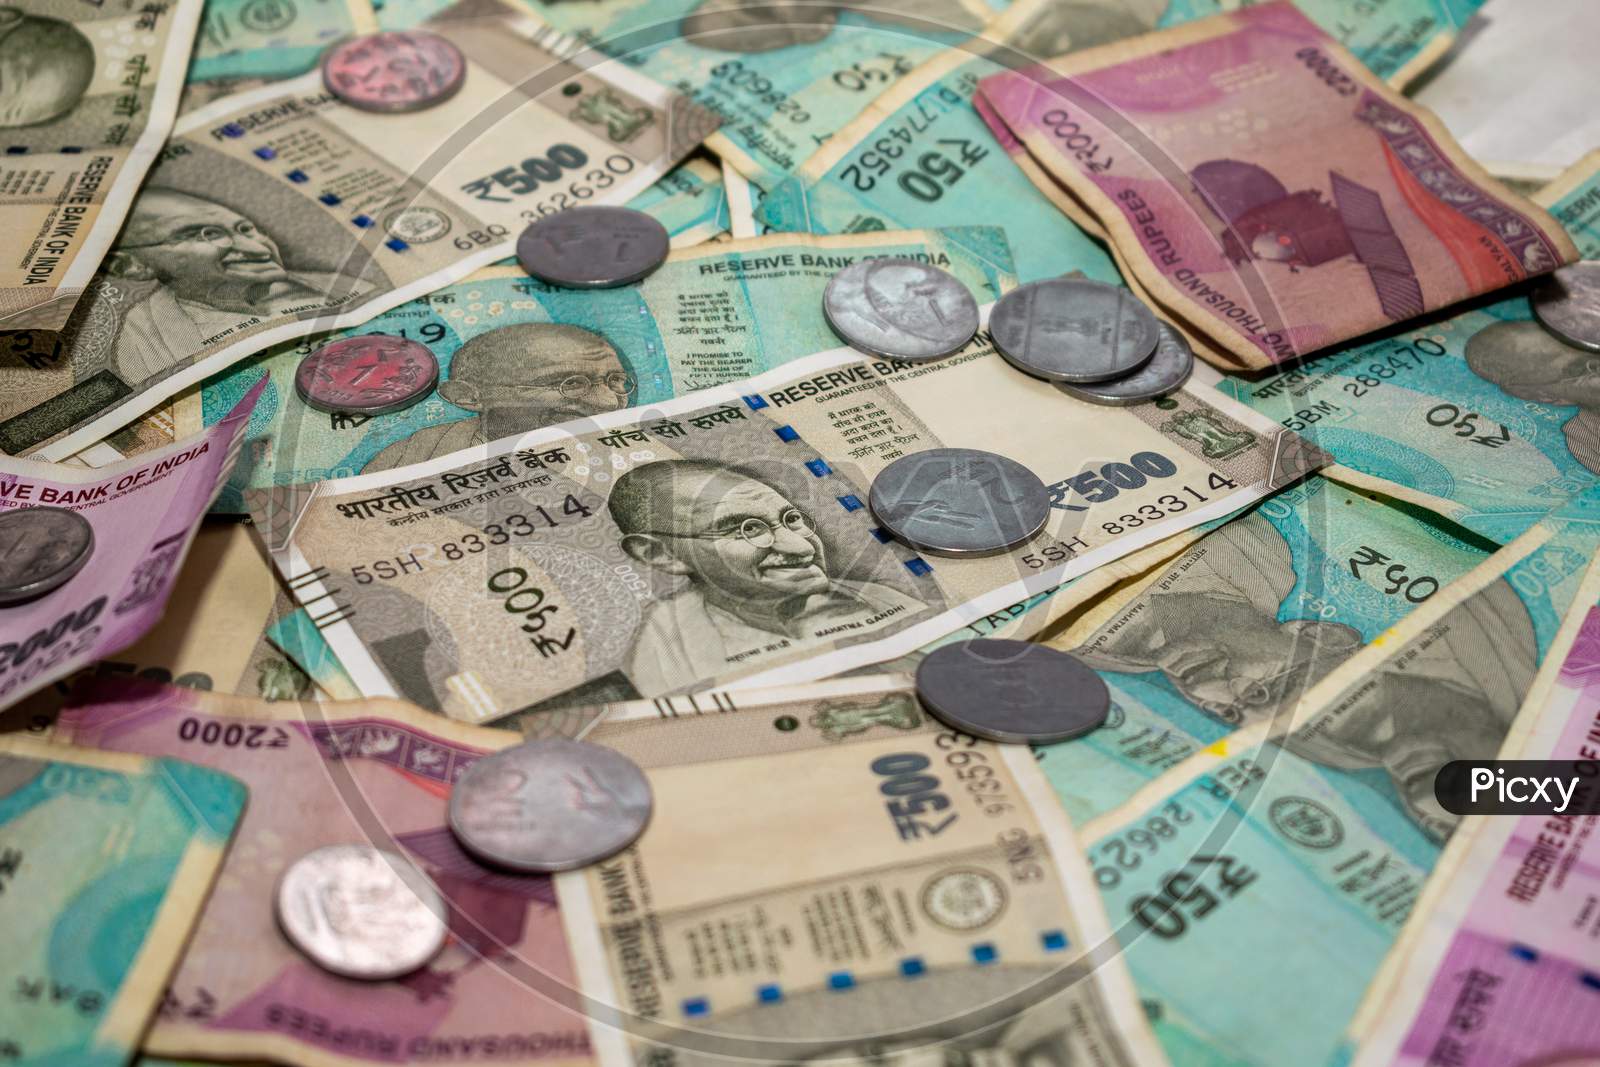 Indian currency notes and coins